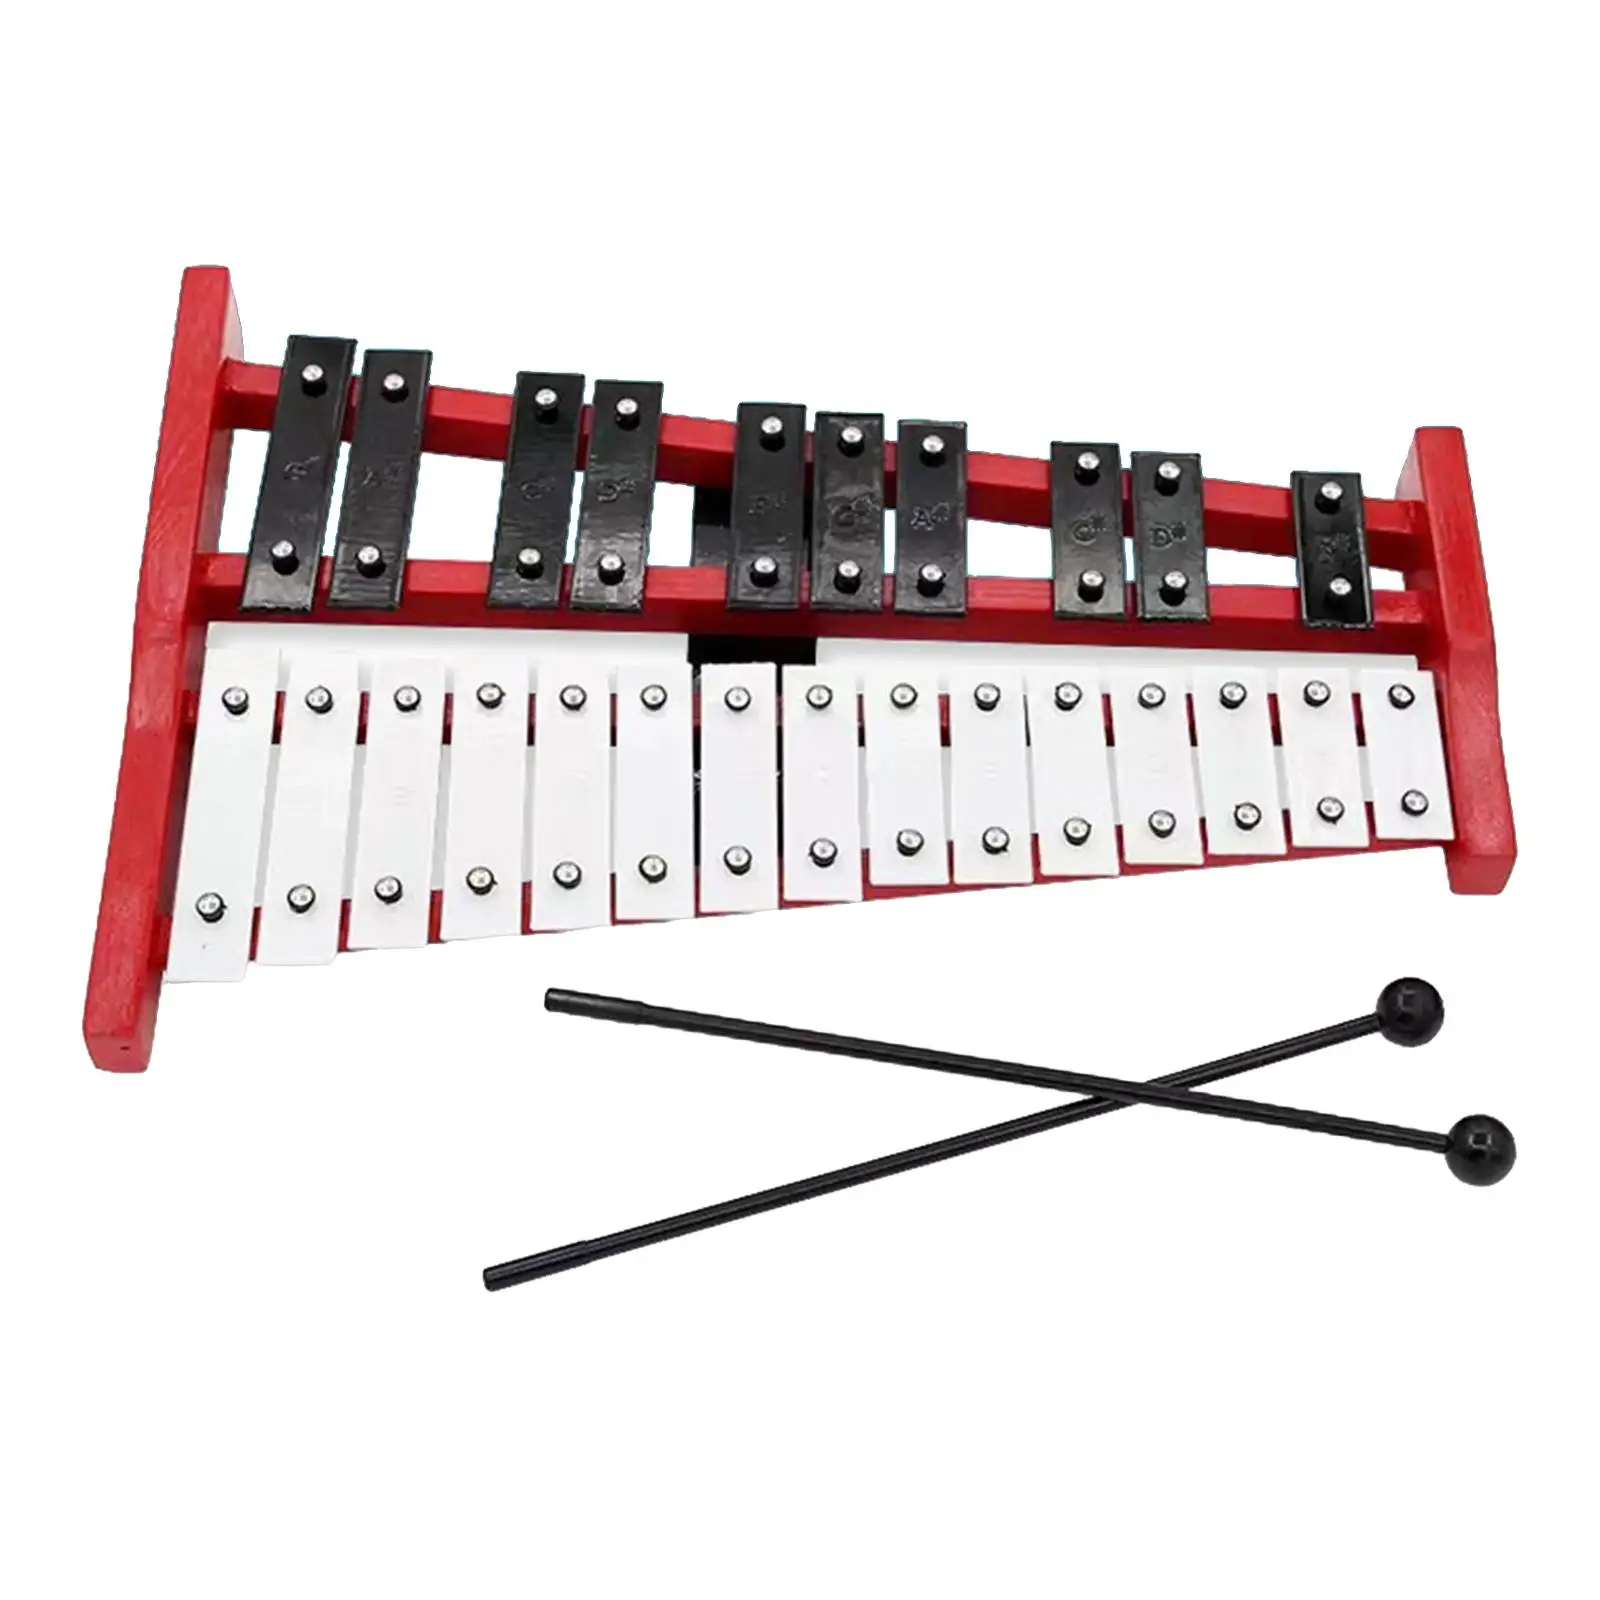 Xylophone Musical Toy Fine Motor Skill Portable Hand Knock Piano Toy for Music Lessons School Orchestras Outside Event Concert